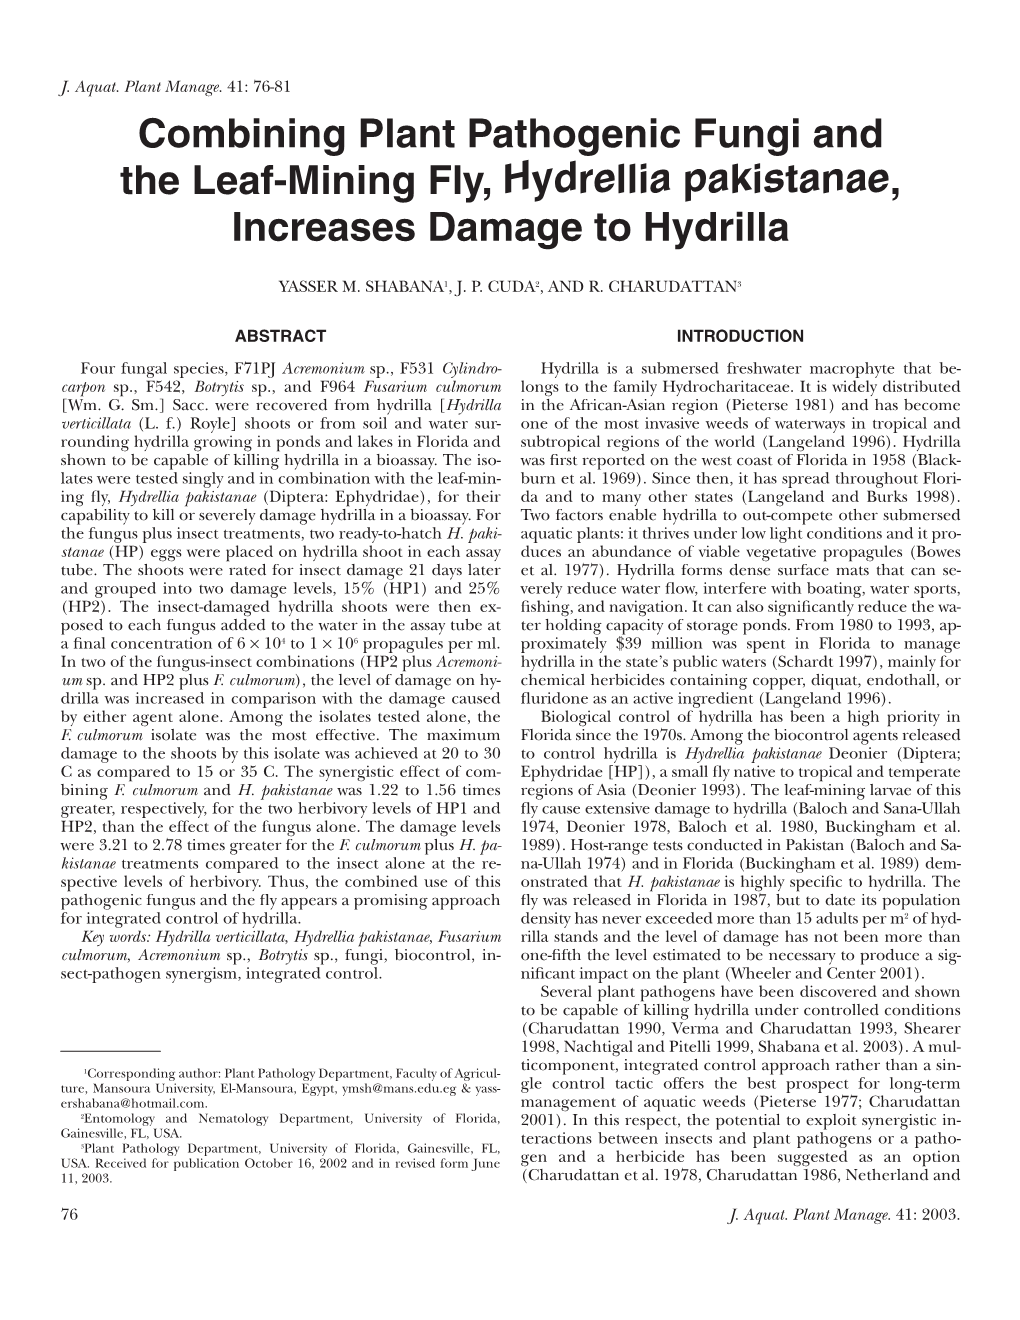 Combining Plant Pathogenic Fungi and the Leaf-Mining Fly, Hydrellia Pakistanae, Increases Damage to Hydrilla